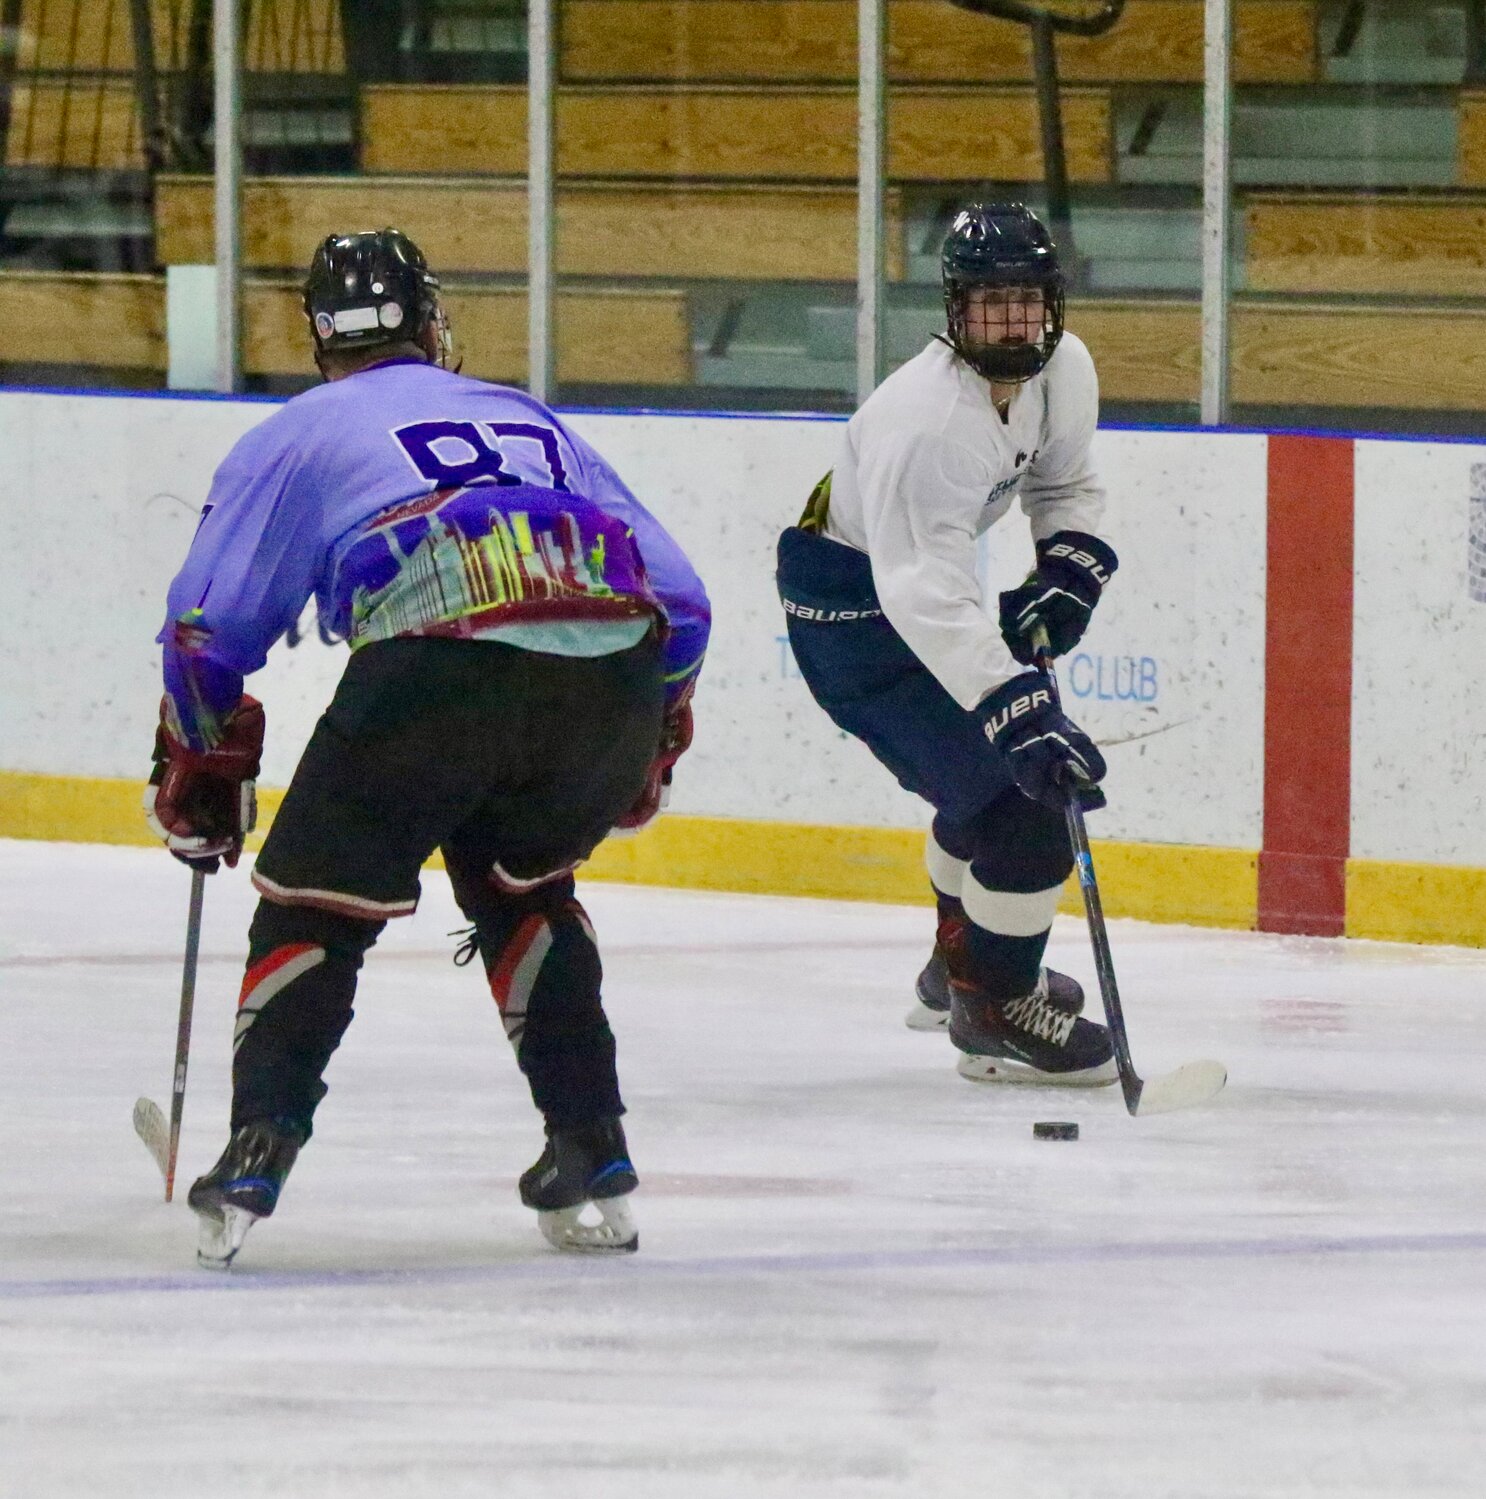 The Nantucket Hockey Foundation's annual pre-Thanksgiving hockey tournament began Friday and continues Saturday at Nantucket Ice.